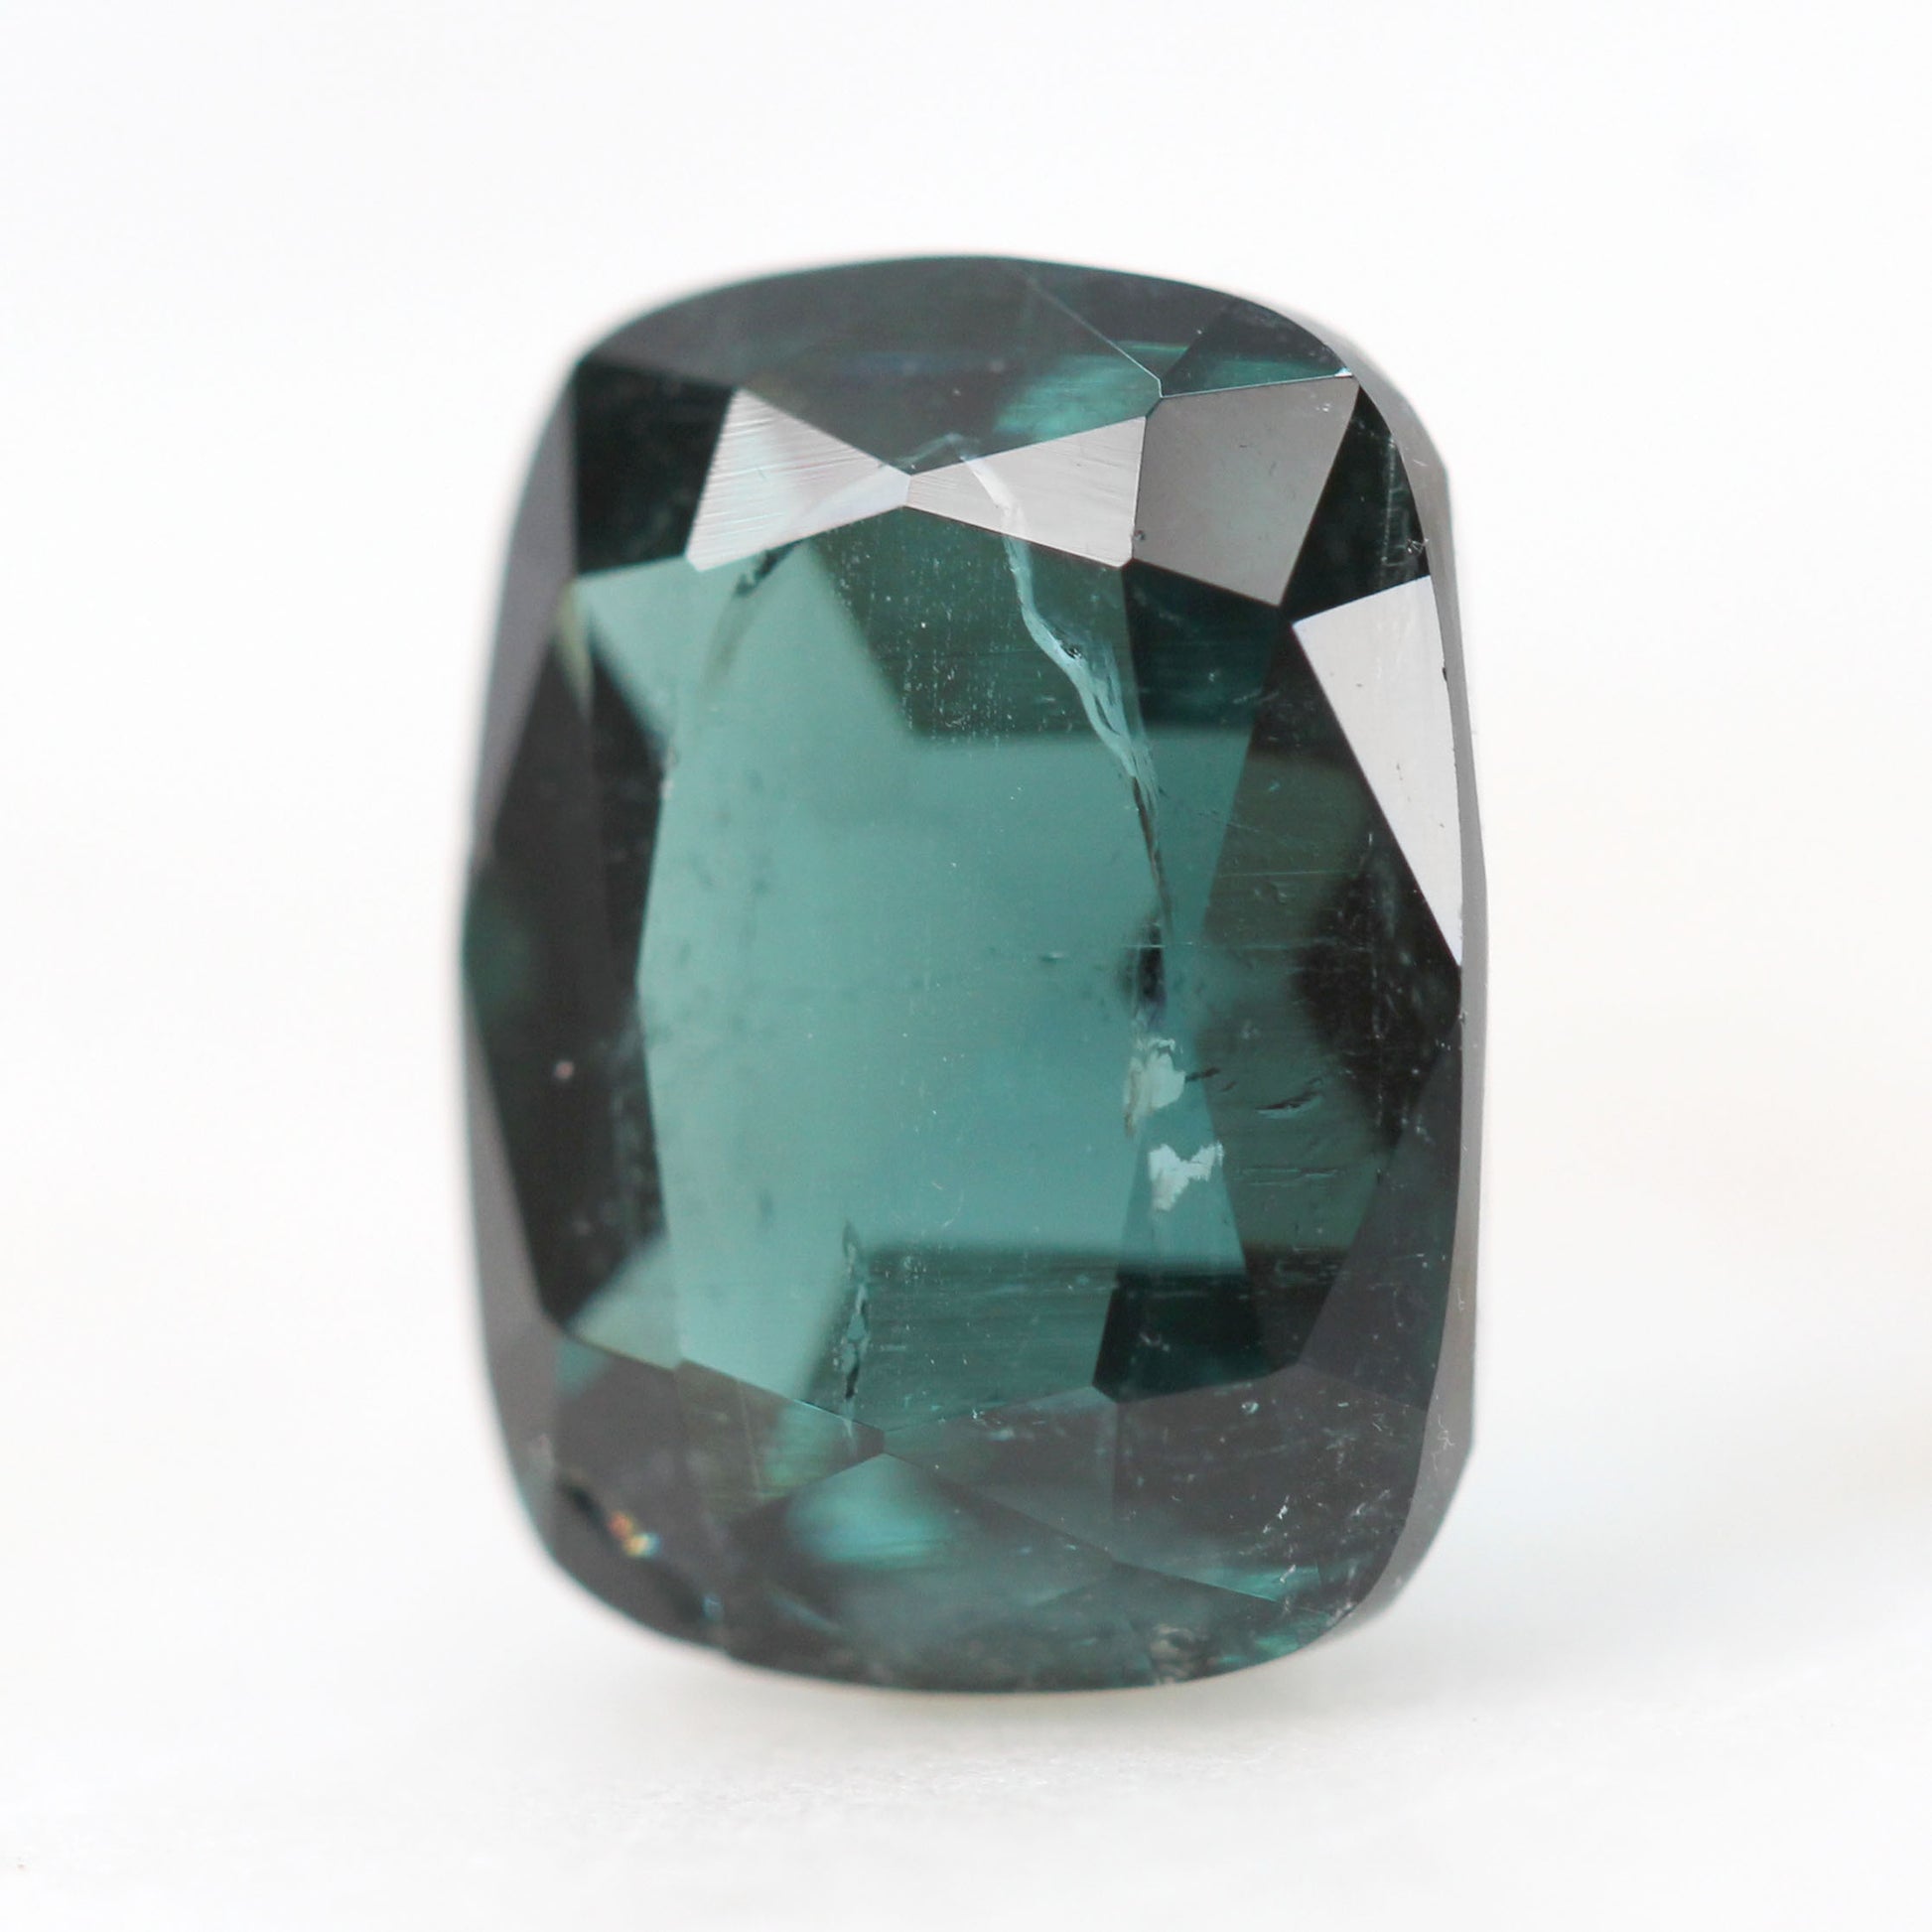 3.85 Carat Cushion Cut Indicolite Blue Tourmaline for Custom Work - Inventory Code TCT385 - Midwinter Co. Alternative Bridal Rings and Modern Fine Jewelry